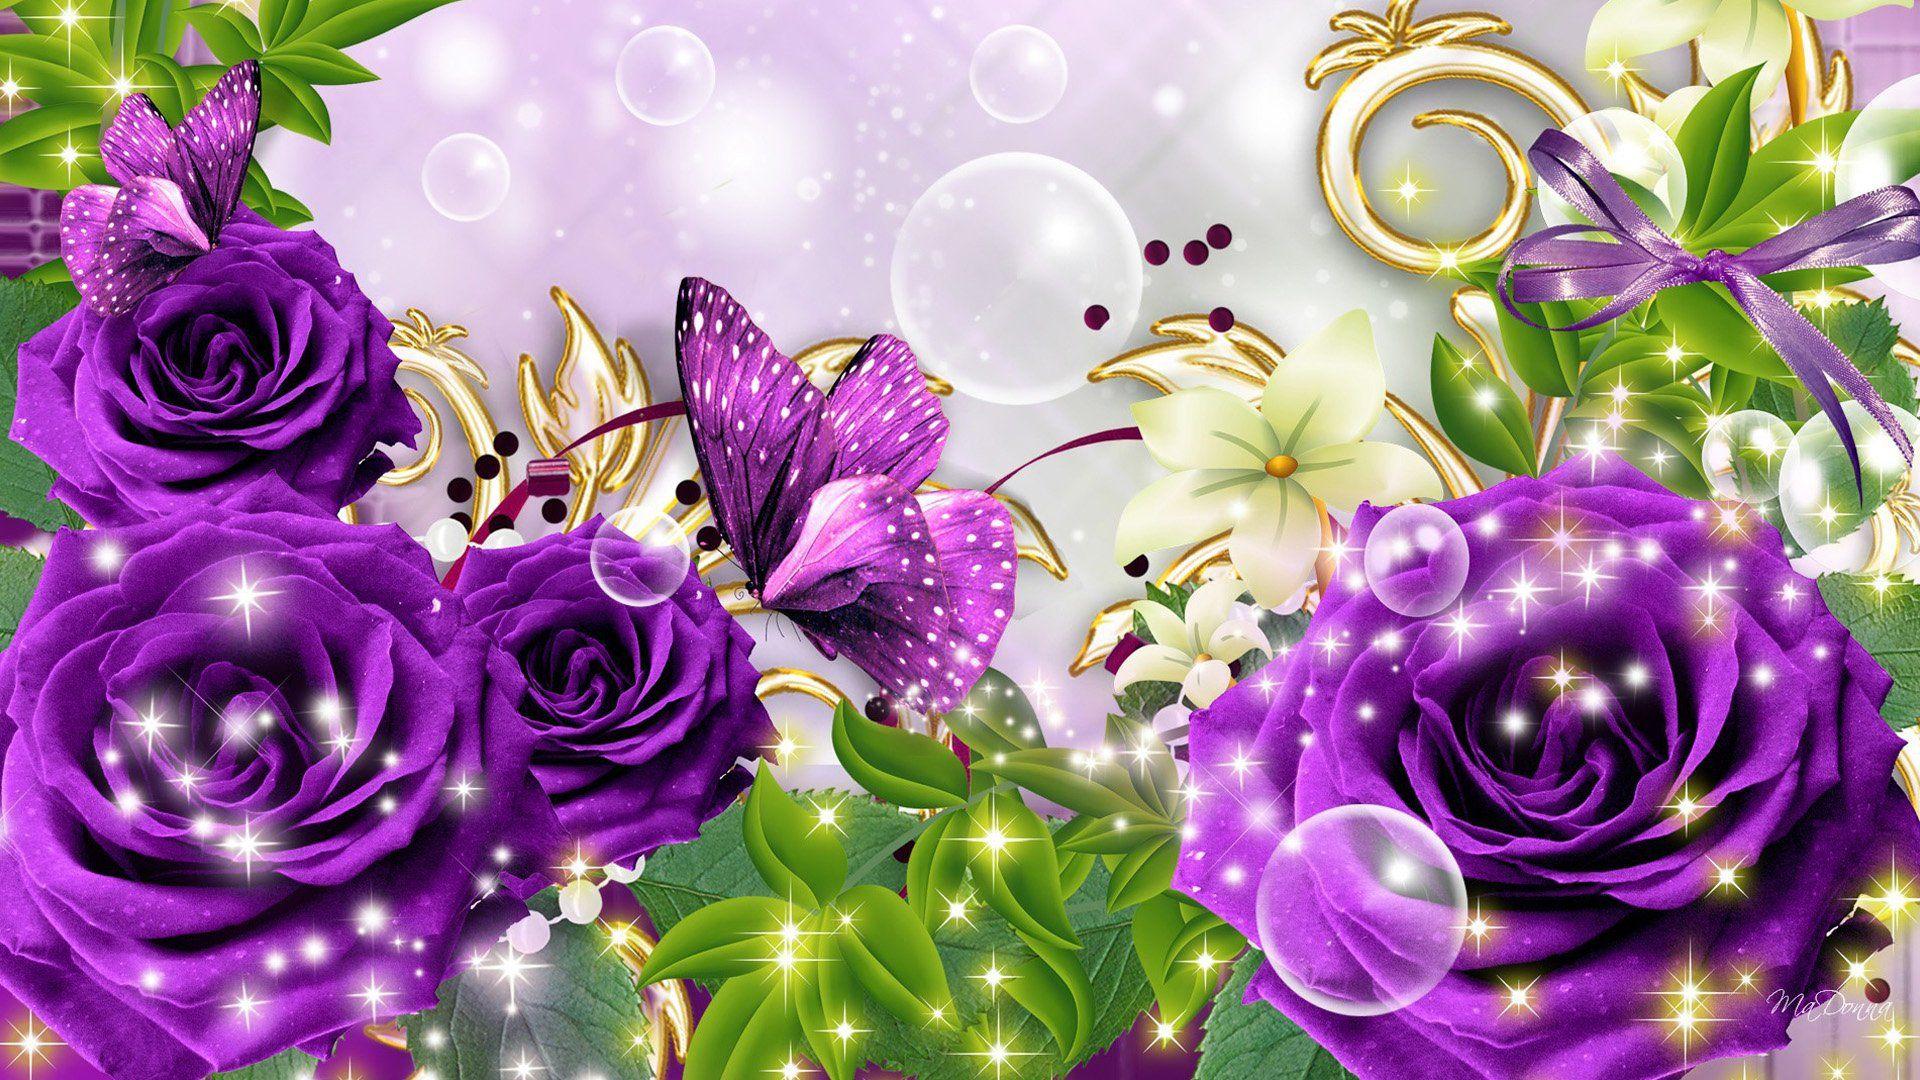 Purple Roses and Butterflies HD Wallpaper. Background Image